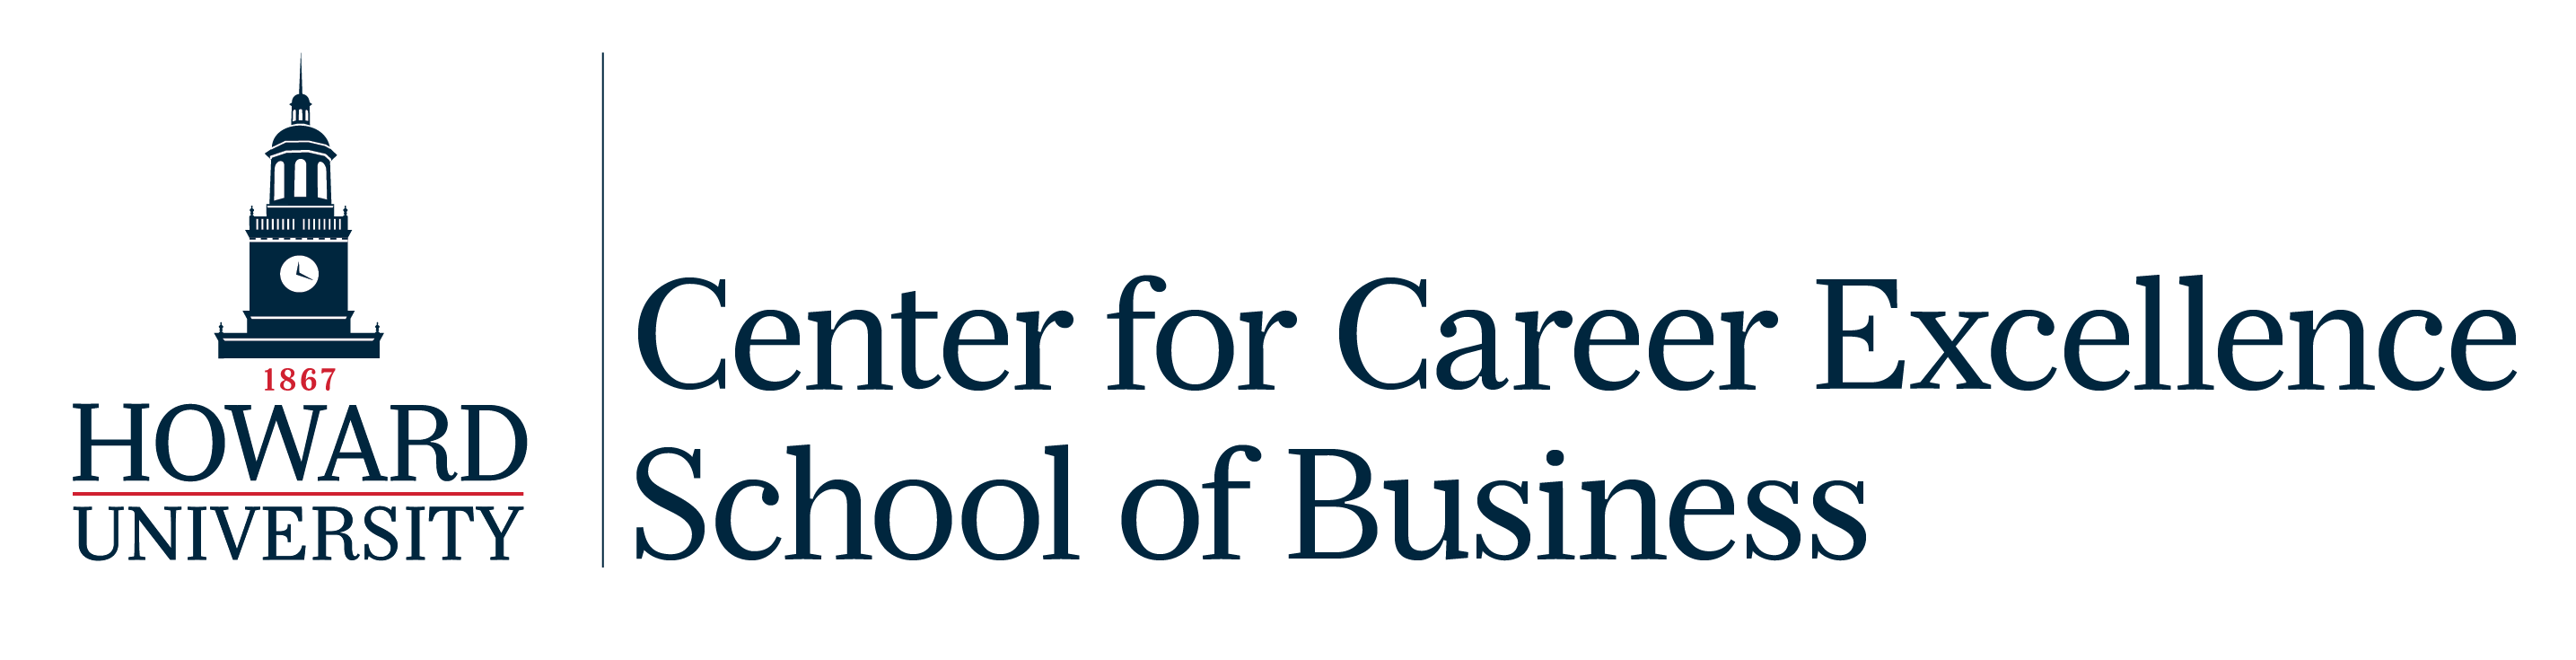 Center for Career Excellence